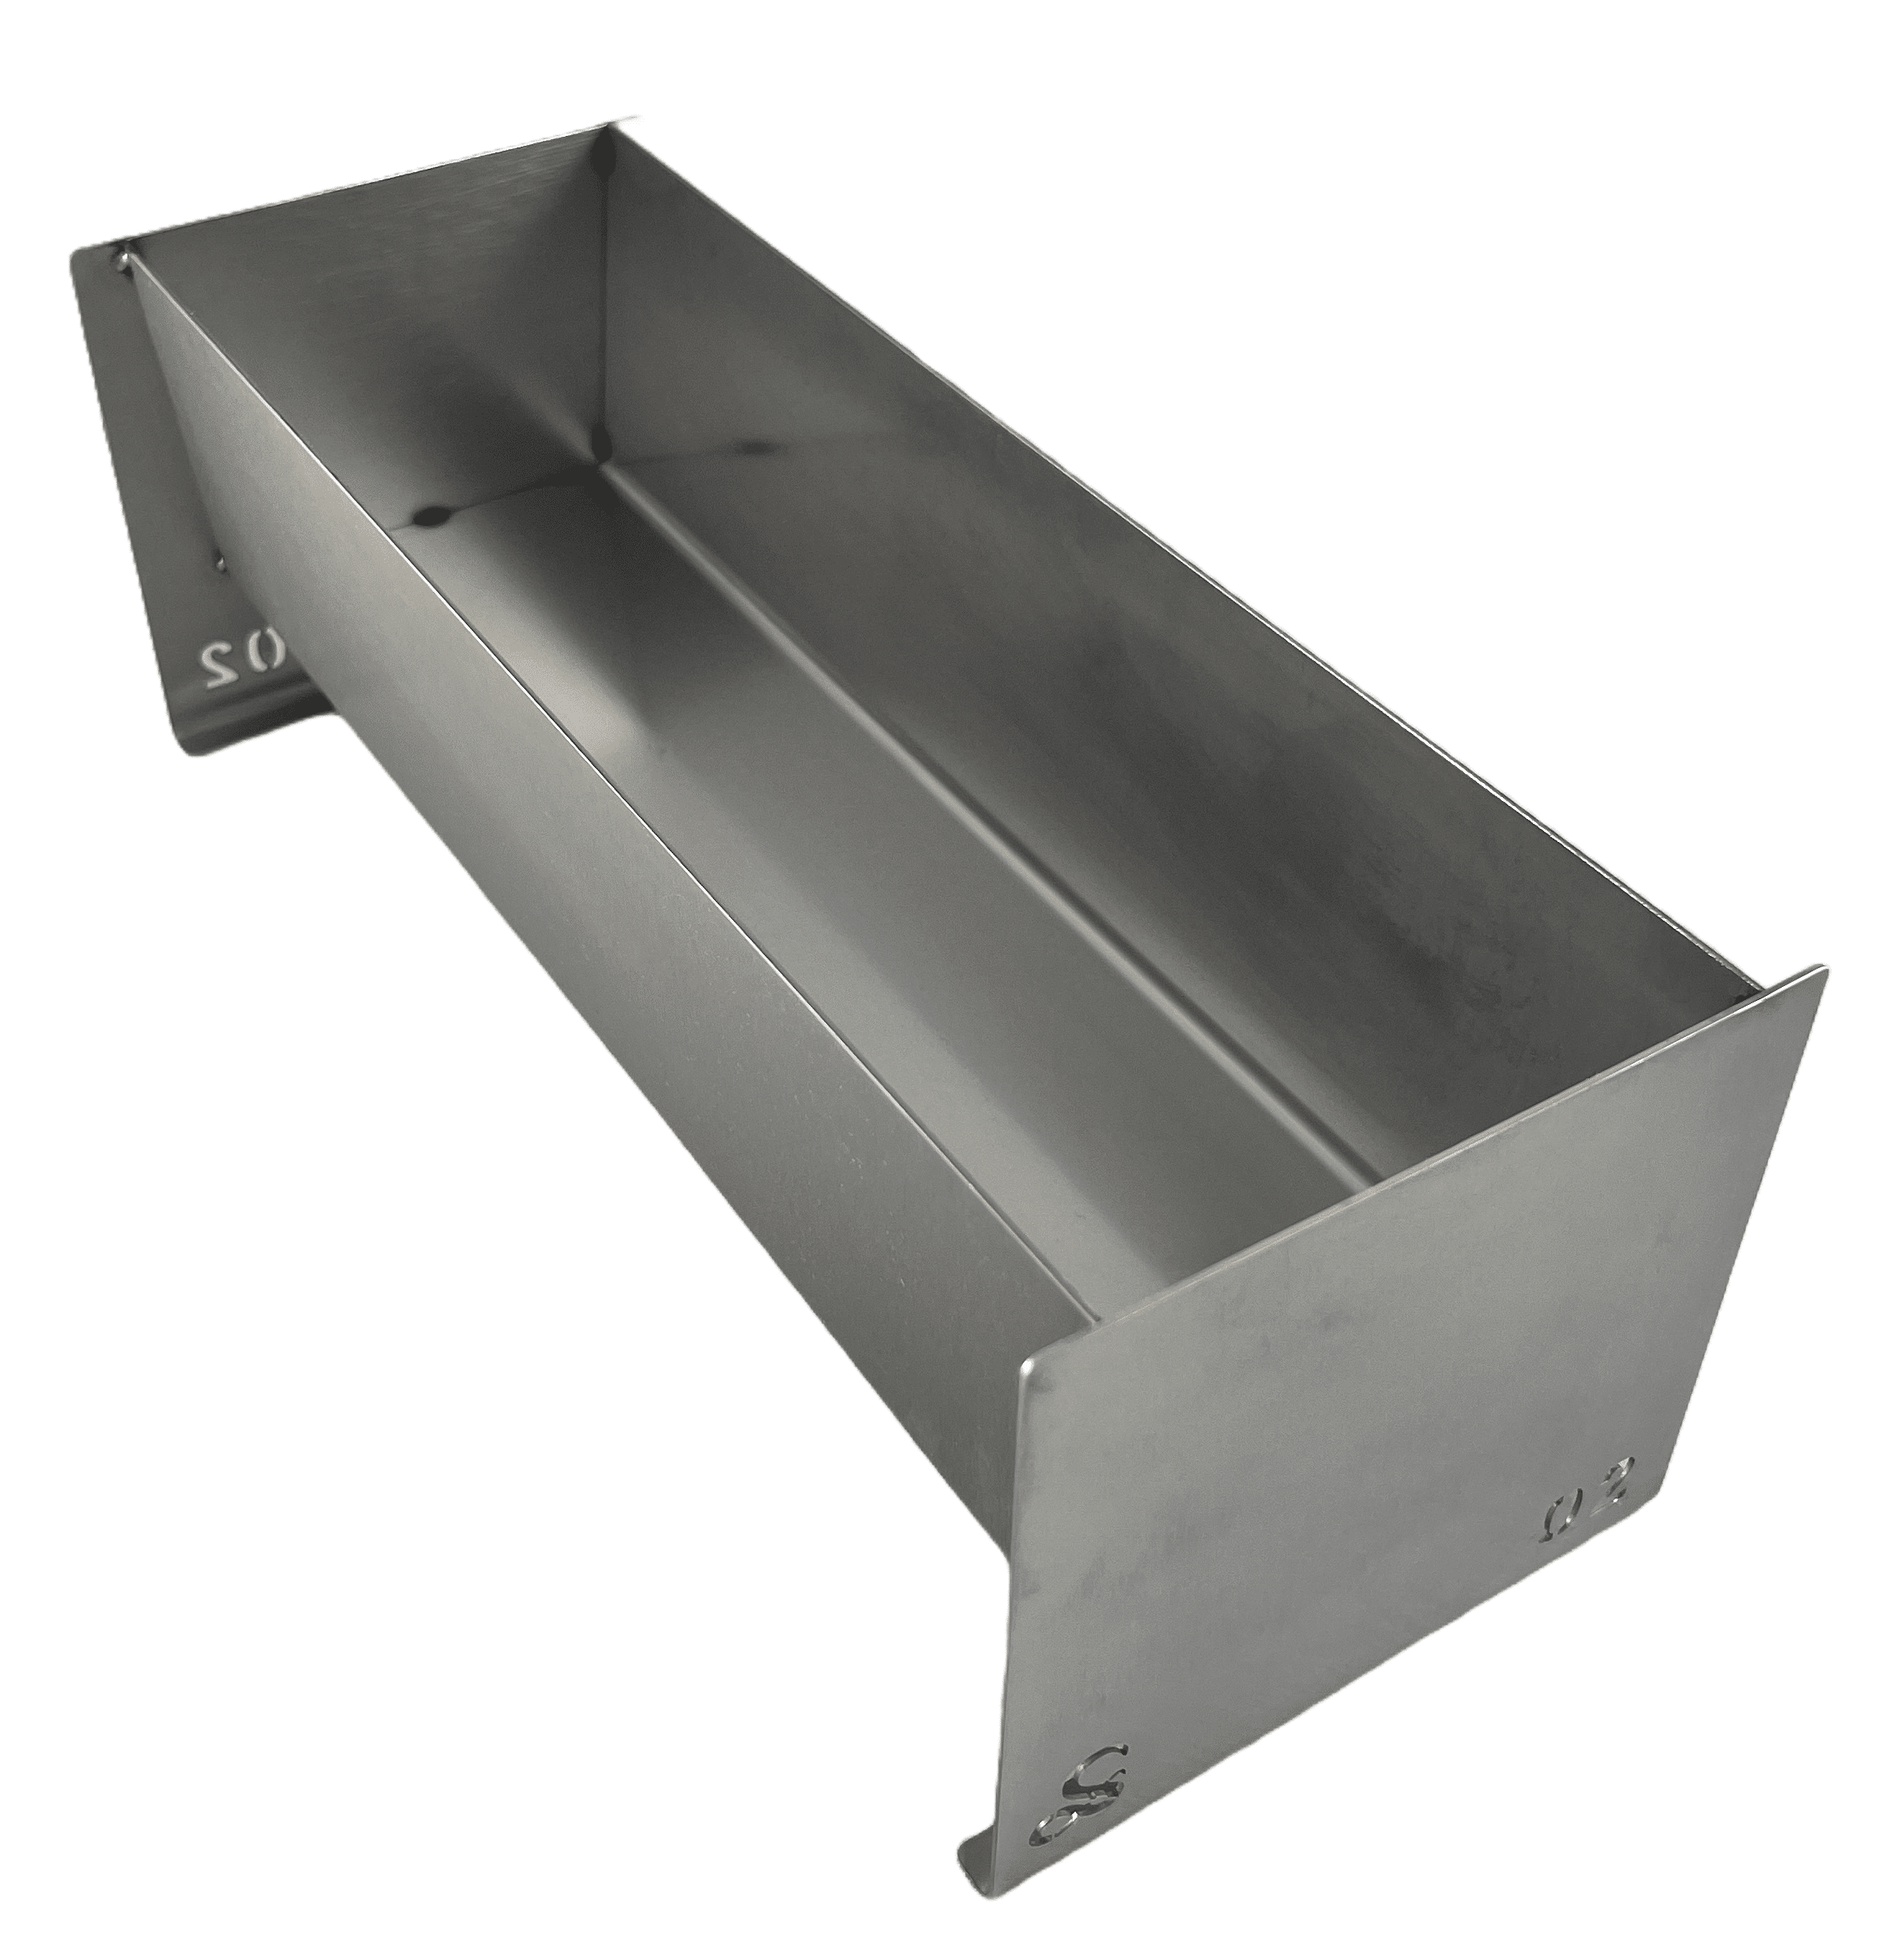 Enhance your baking experience with a stainless steel loaf tin type 2, showcasing a numbered box for easy identification and extended durability.